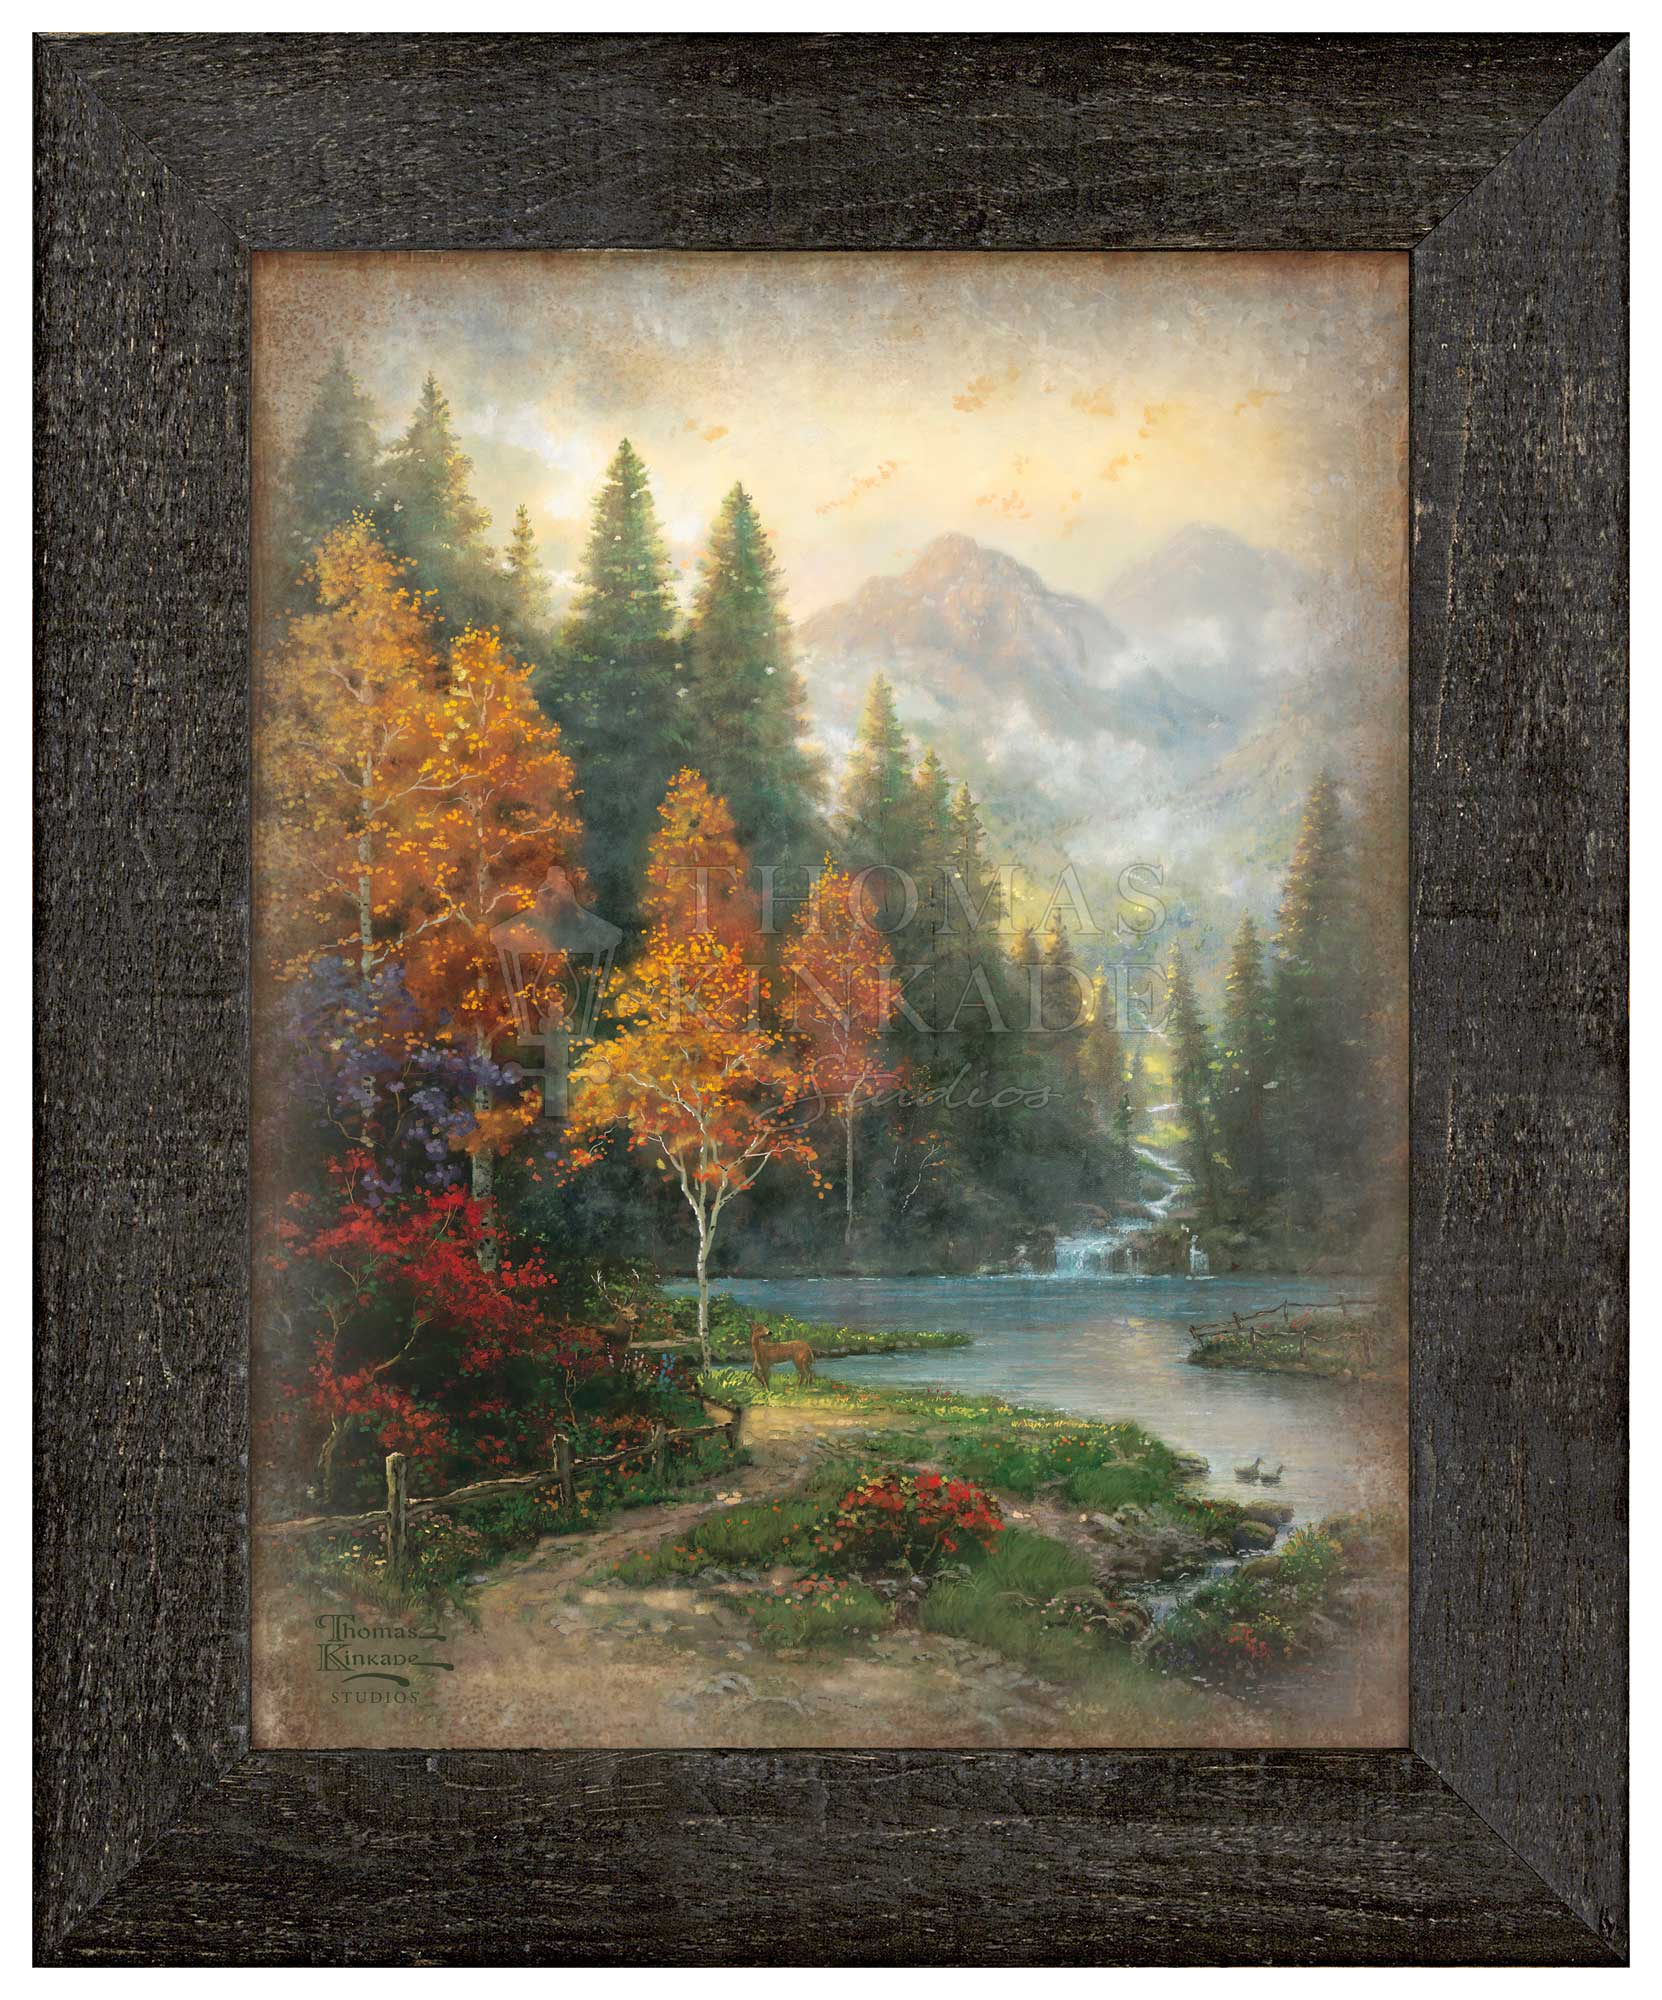 Thomas Kinkade Crystal Art D I Y A Quiet Evening Picture Kit